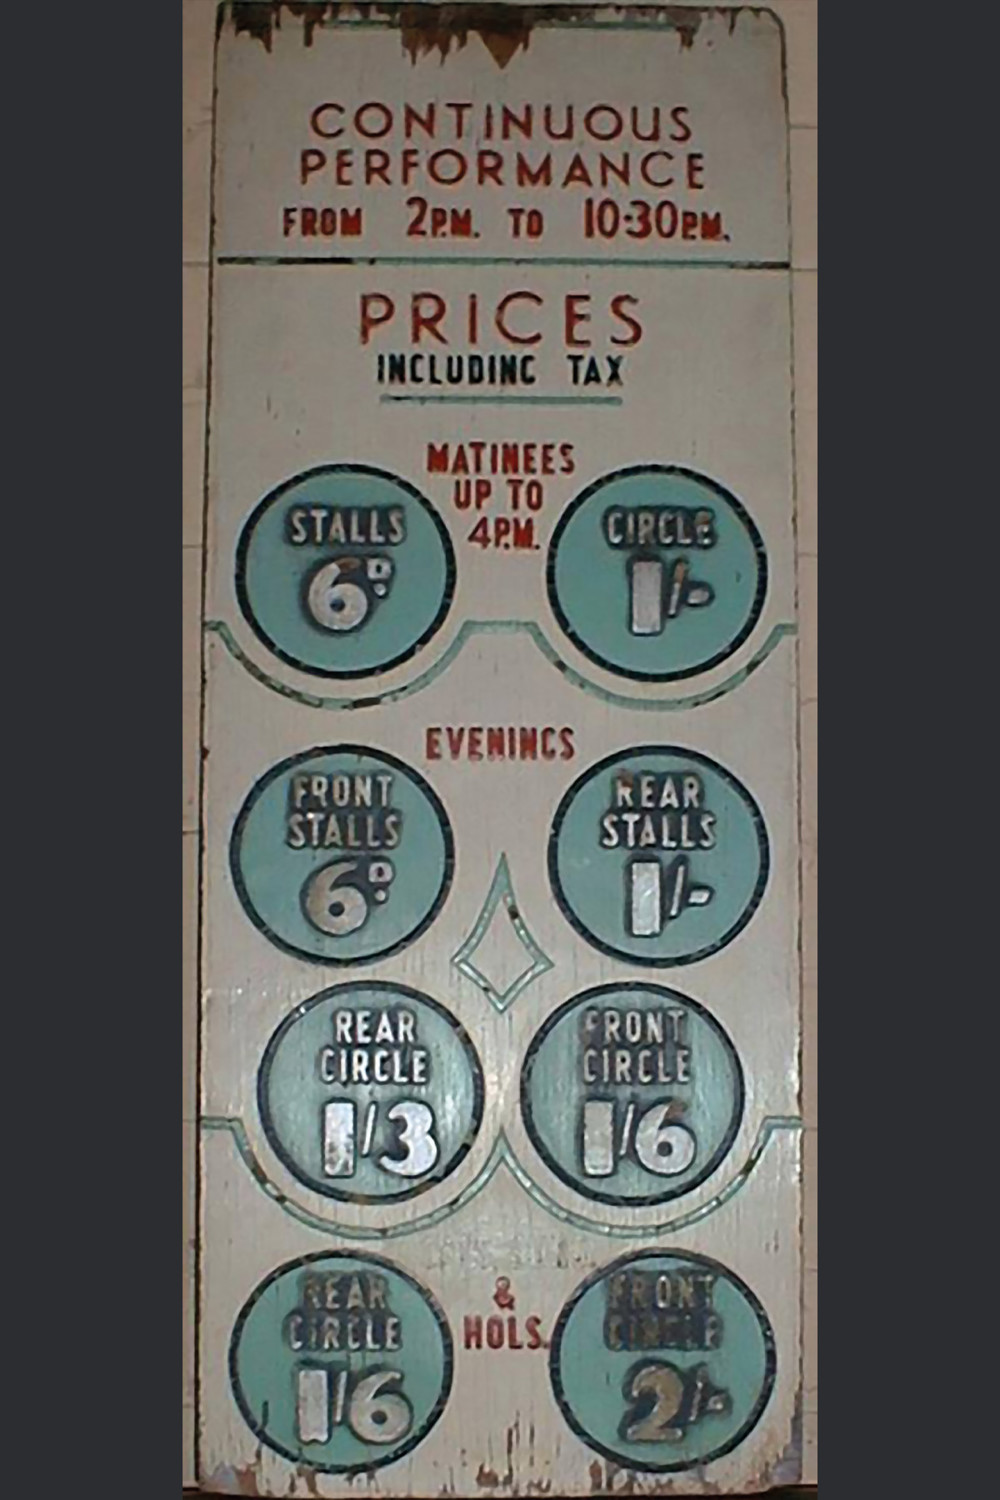 Seat pricing for The Savoy Cinema, Leicester